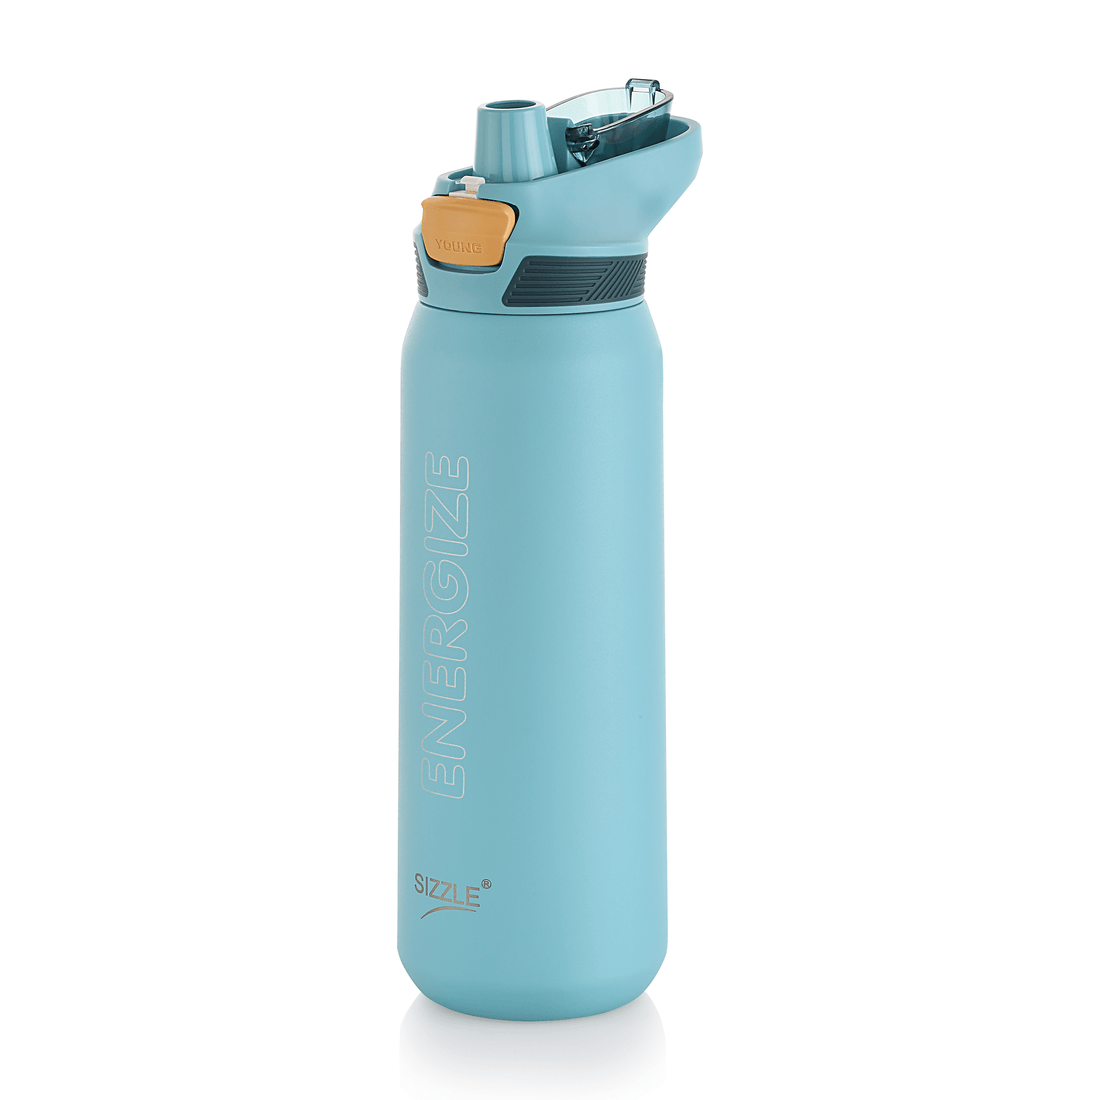 Sinq Double Wall Vacuum Insulated Bottle - 800ml